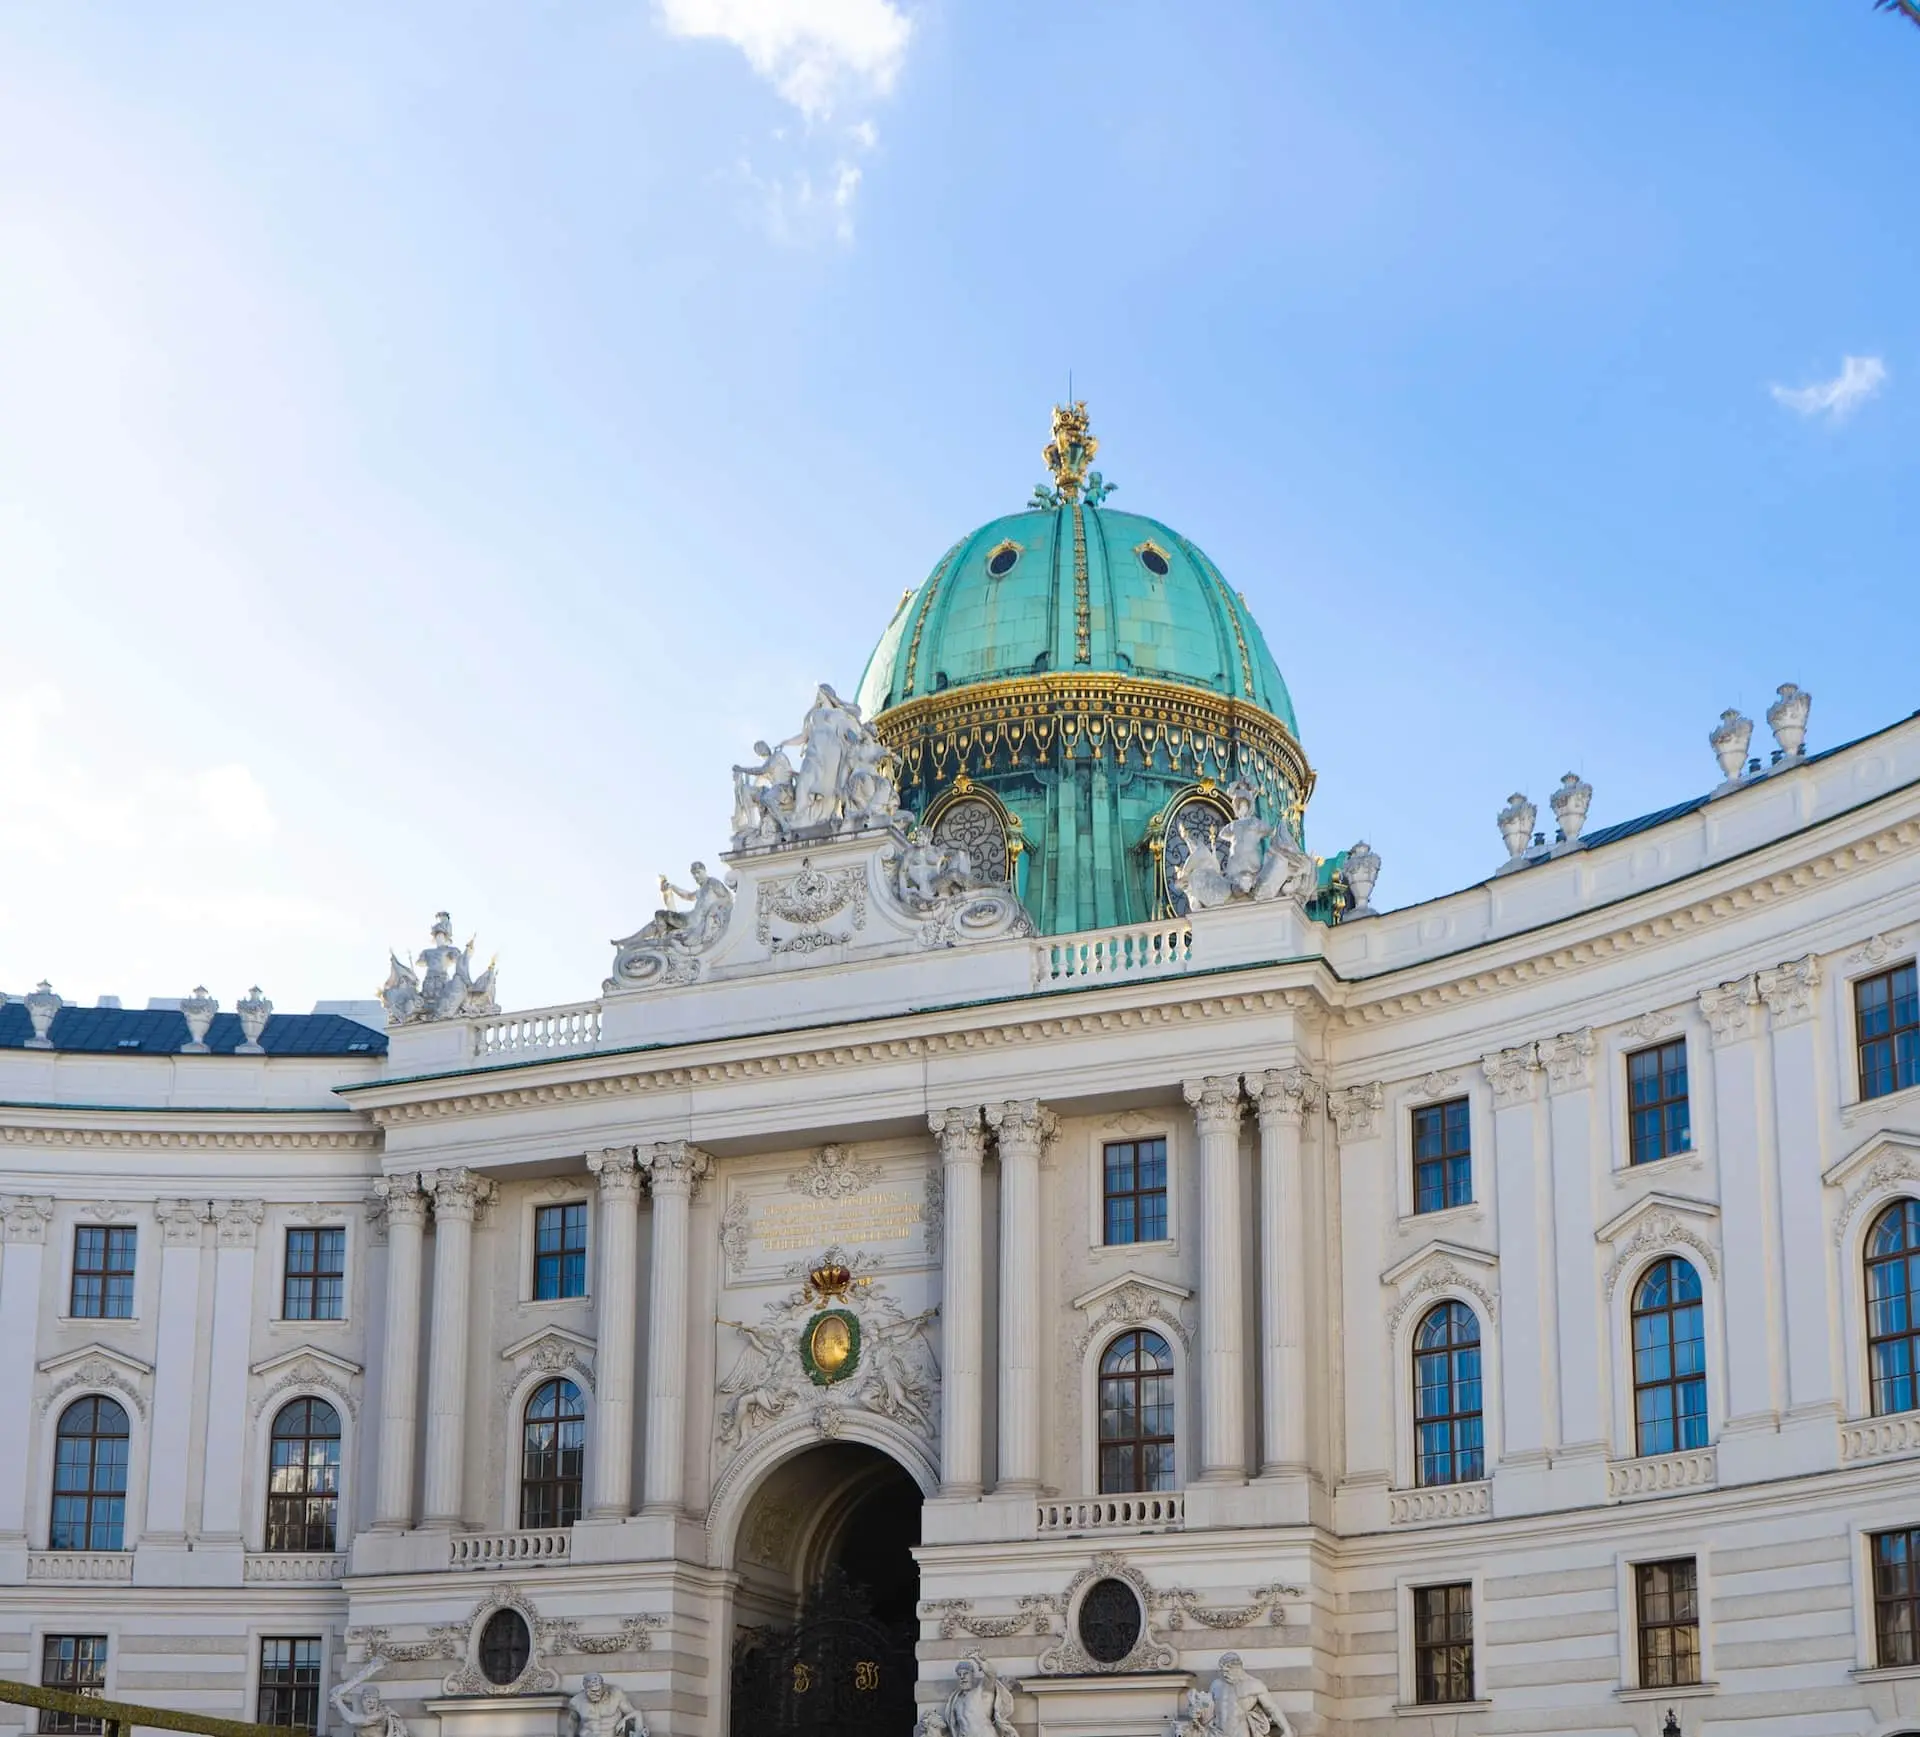 The colorful dome of Hofburg Palace.